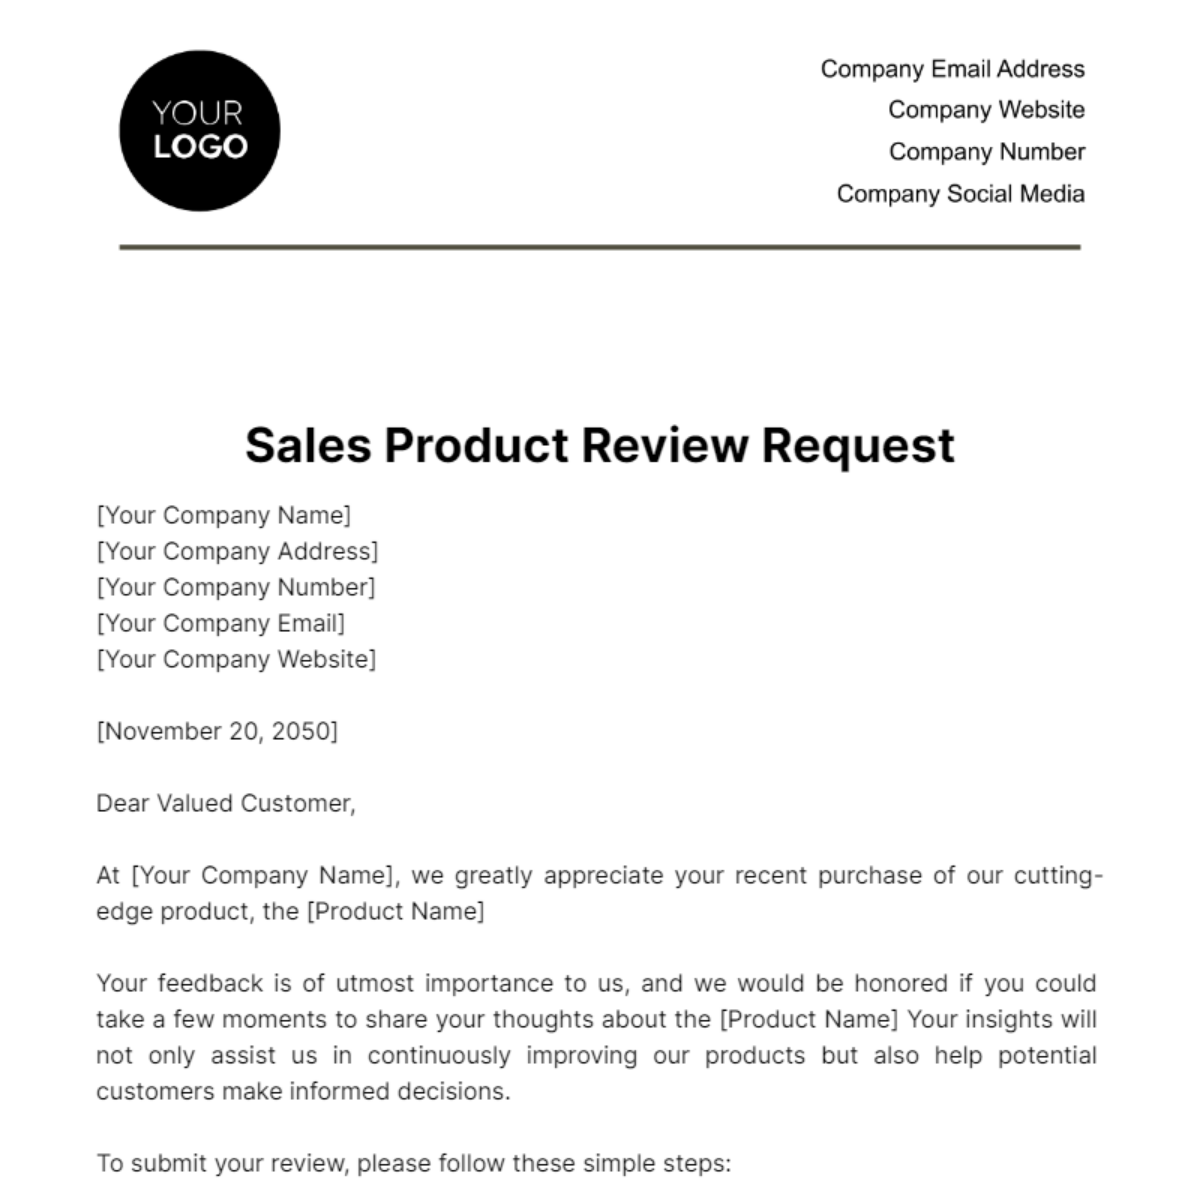 Sales Product Review Request Template